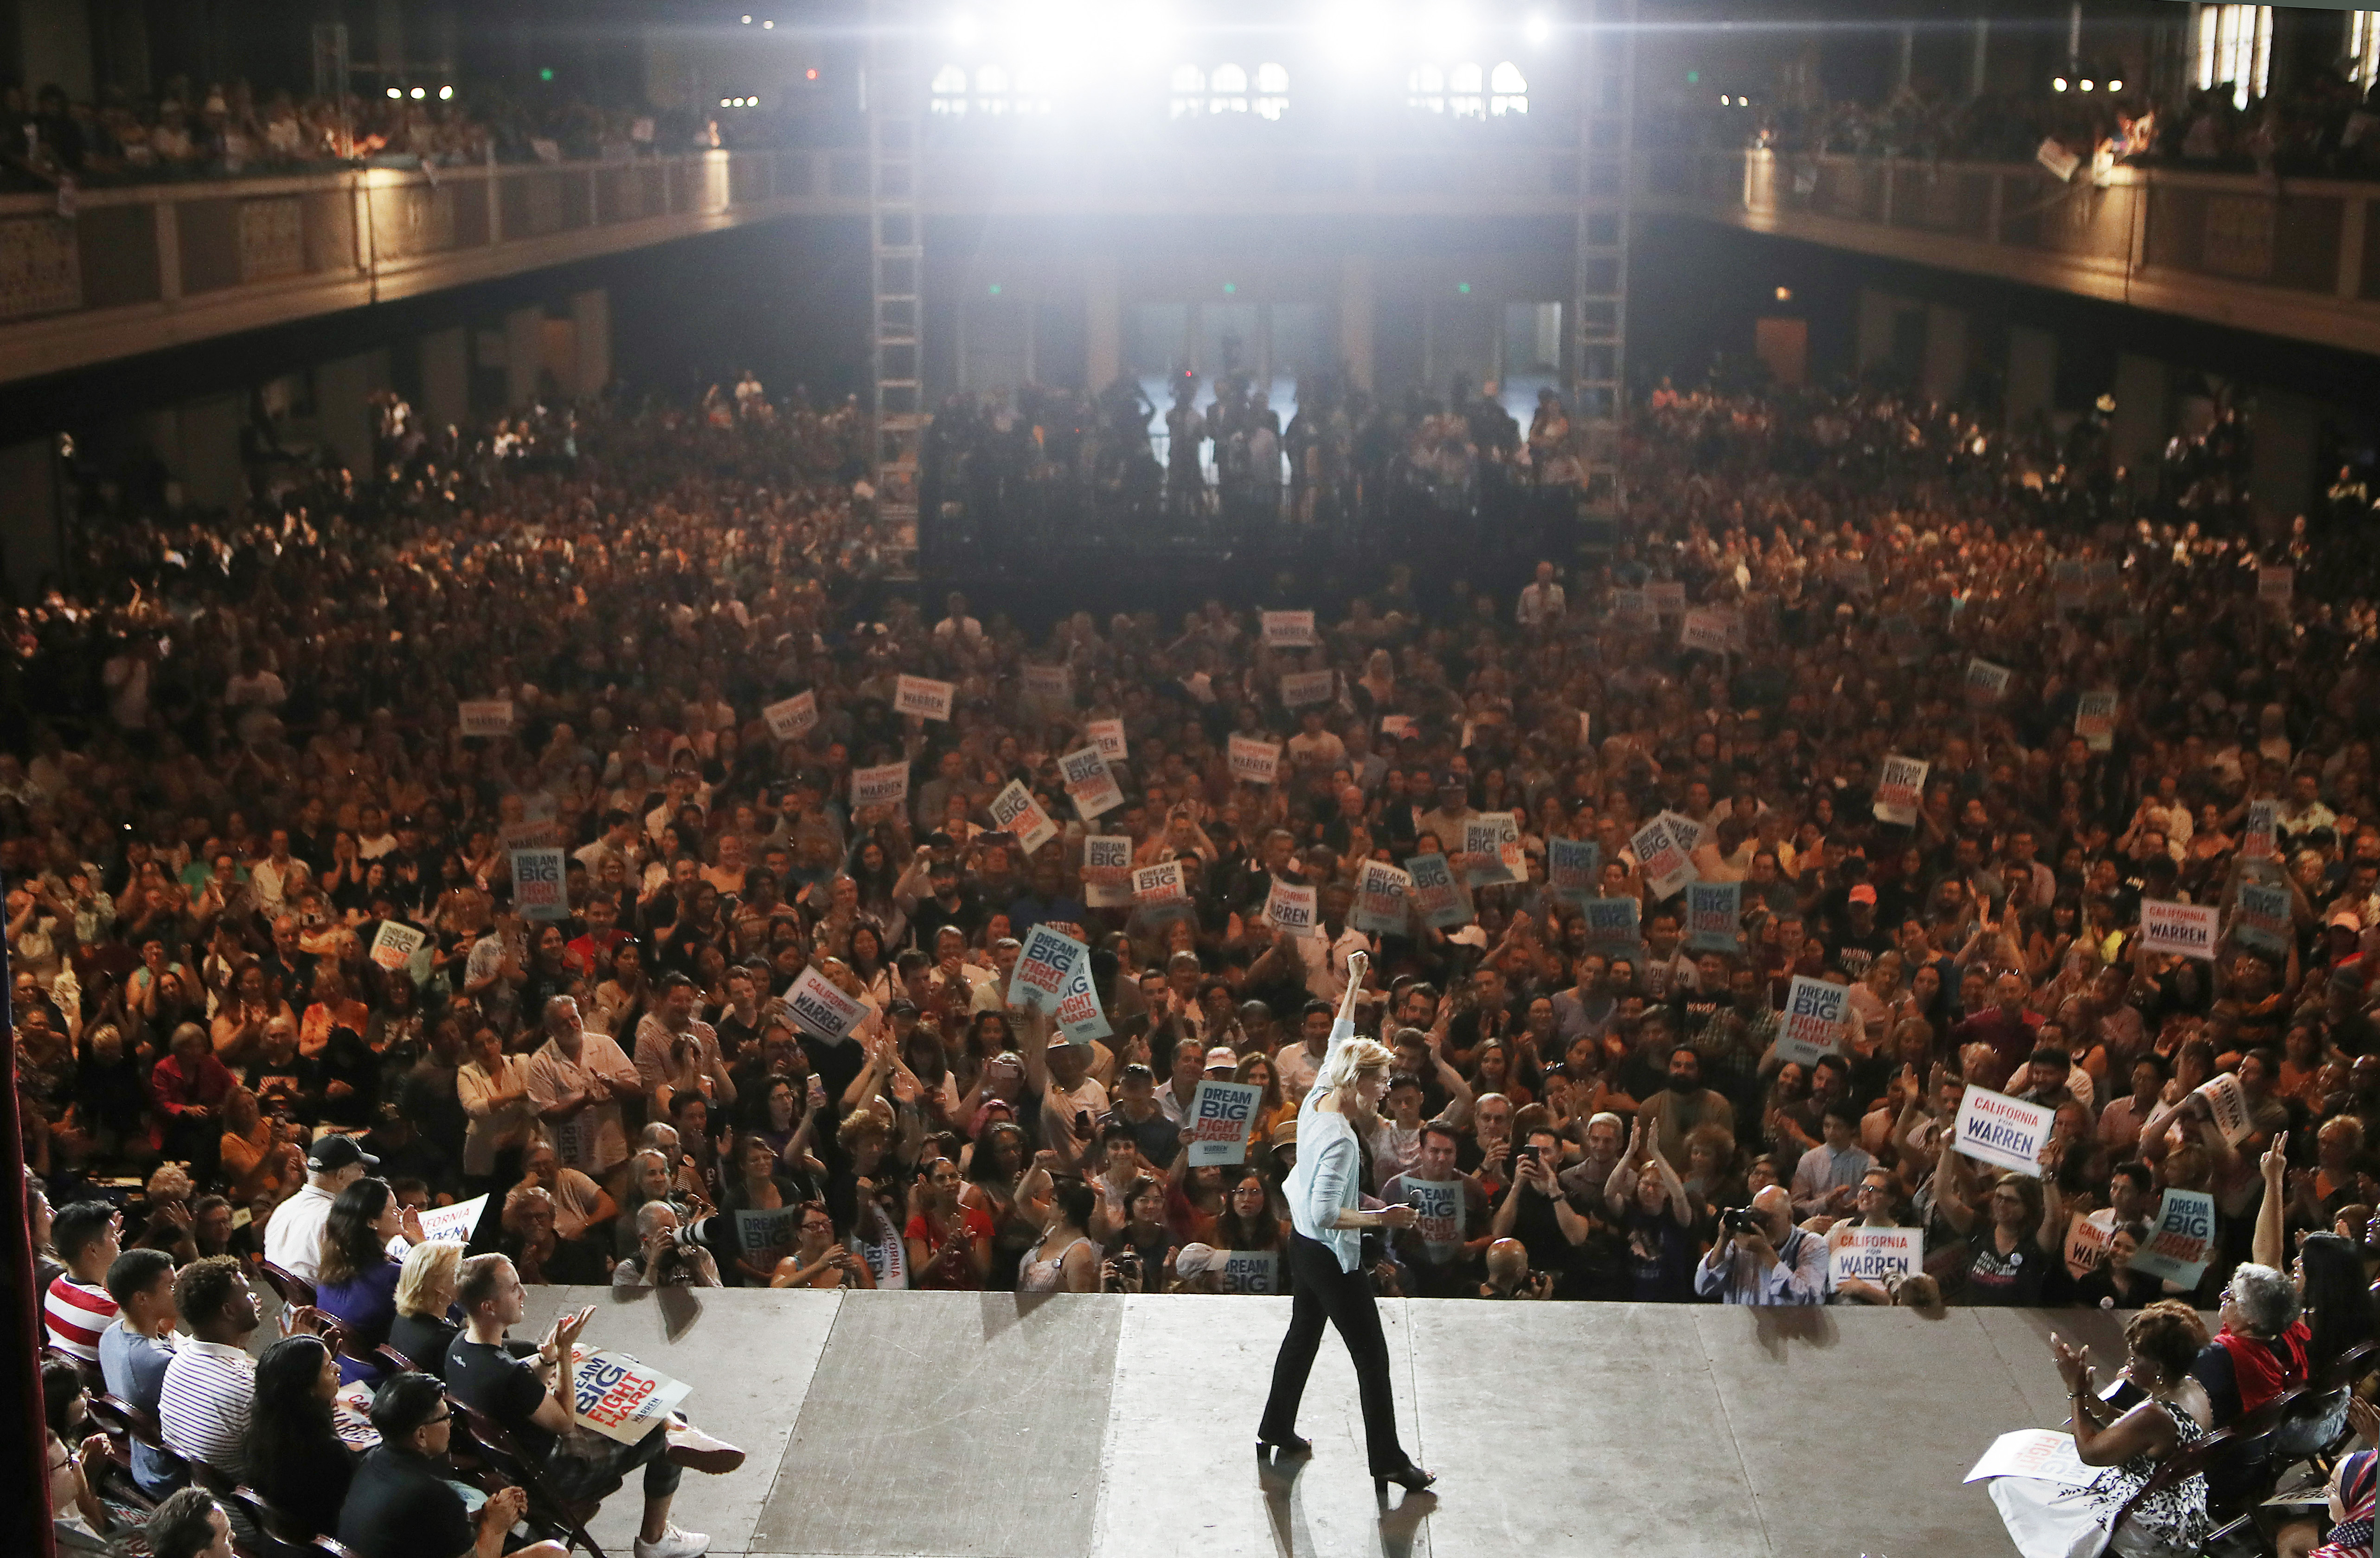 LOS ANGELES, CALIFORNIA - AUGUST 21: Democratic Presidential candidate Senator Elizabeth Warren speaks to supporters at Shrine Auditorium during a town hall on August 21, 2019 in Los Angeles, California. California will join the Super Tuesday primaries on March 3, 2020. (Photo by Mario Tama/Getty Images)